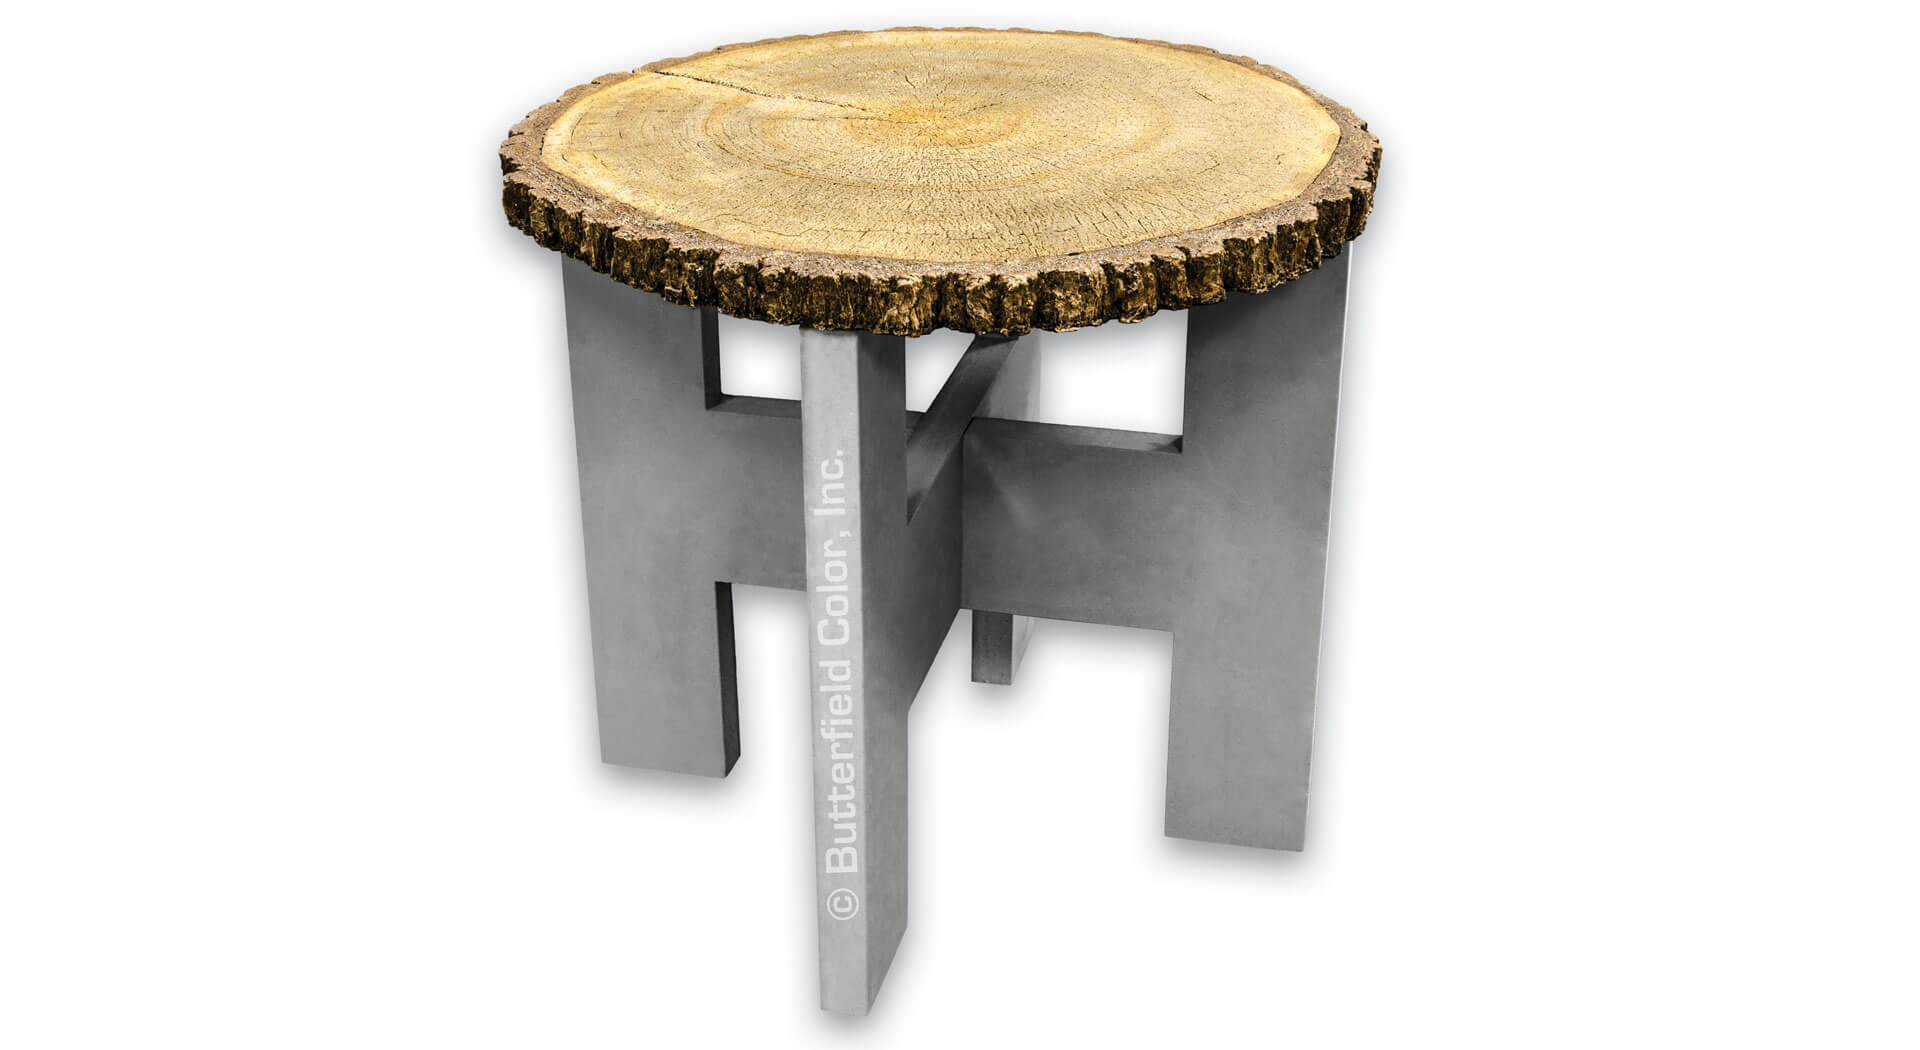 Skilled Oxidize whip 3' Log Round Table Top Mold - Butterfield Color®